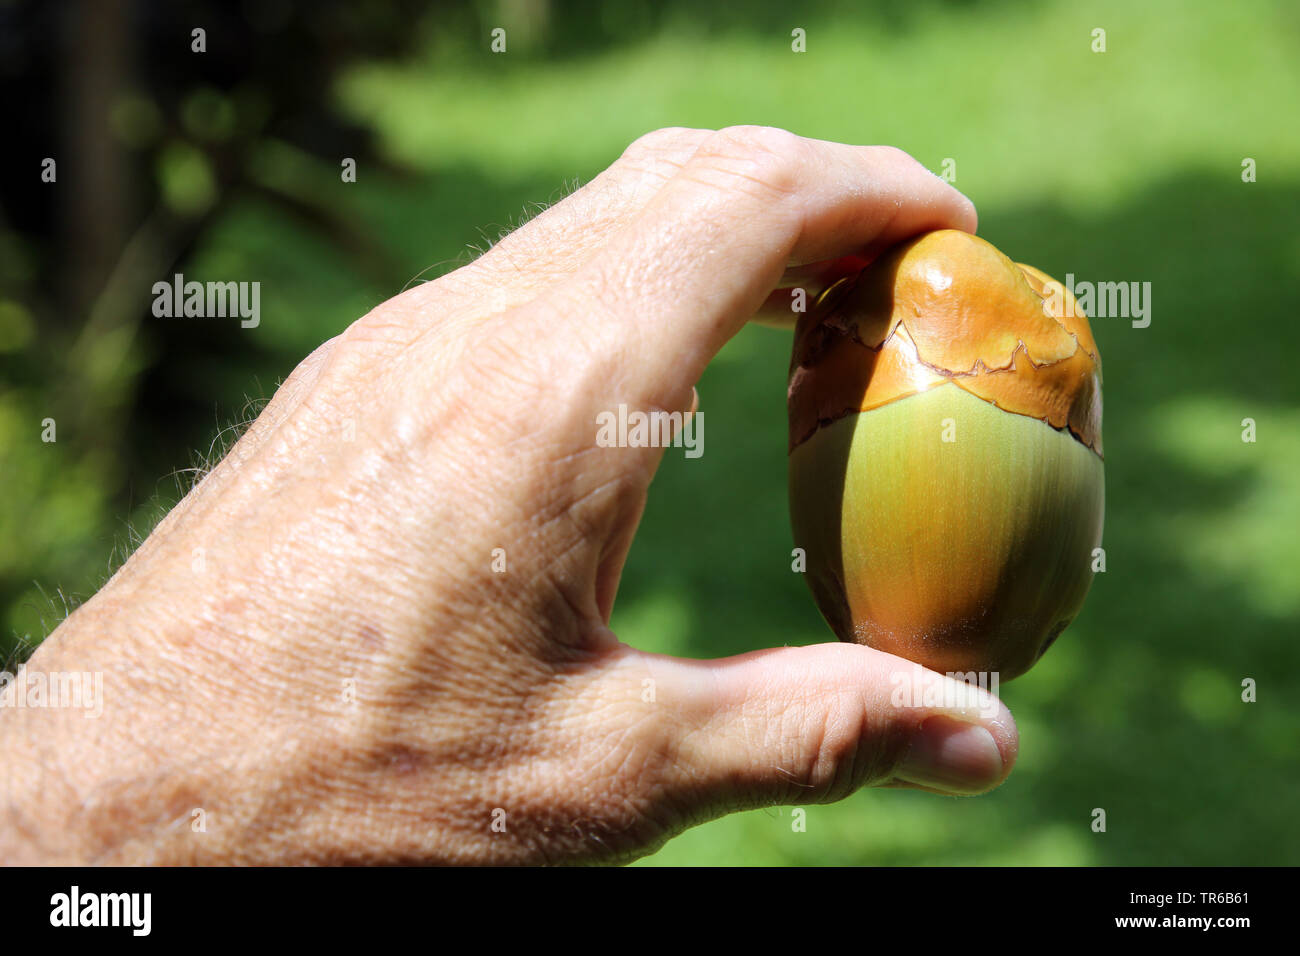 coconut (Cocos nucifera), small coconut fruit in an early stage of development in the hand, Philippines, Southern Leyte, Panaon Island, Pintuyan Stock Photo